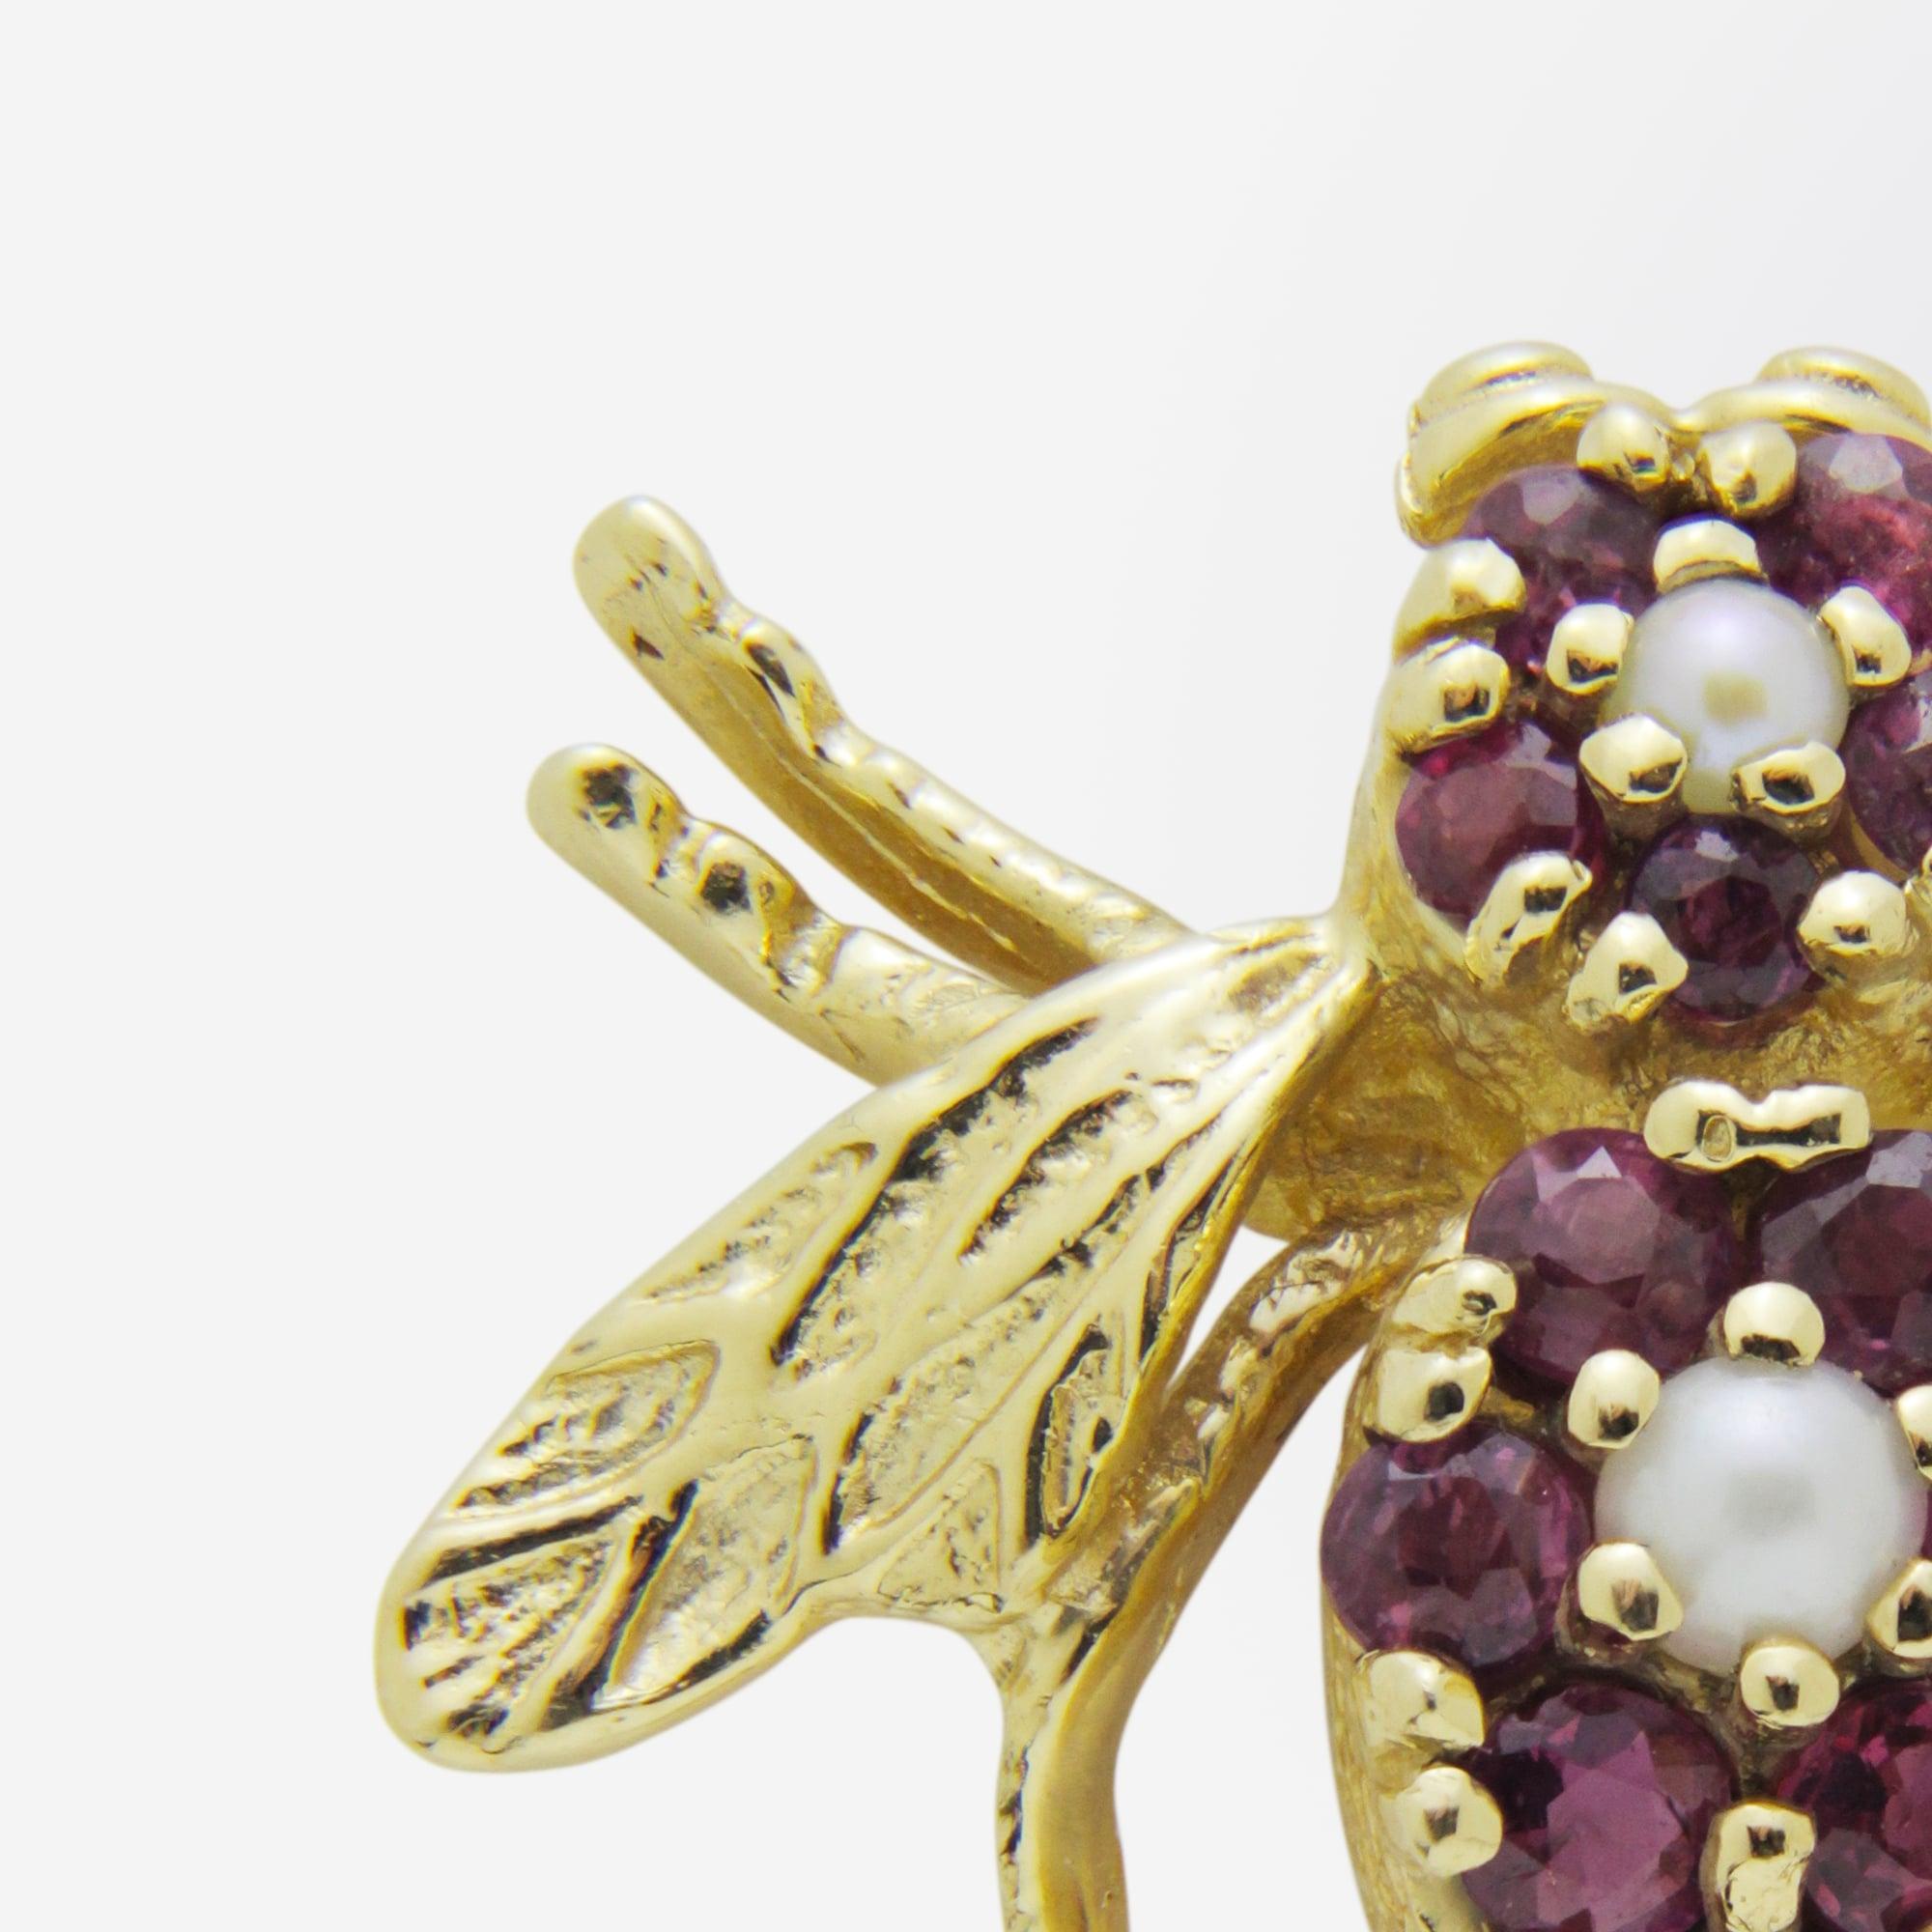 Modern 18 Karat Gold Bee Pin with Rubies and Pearls